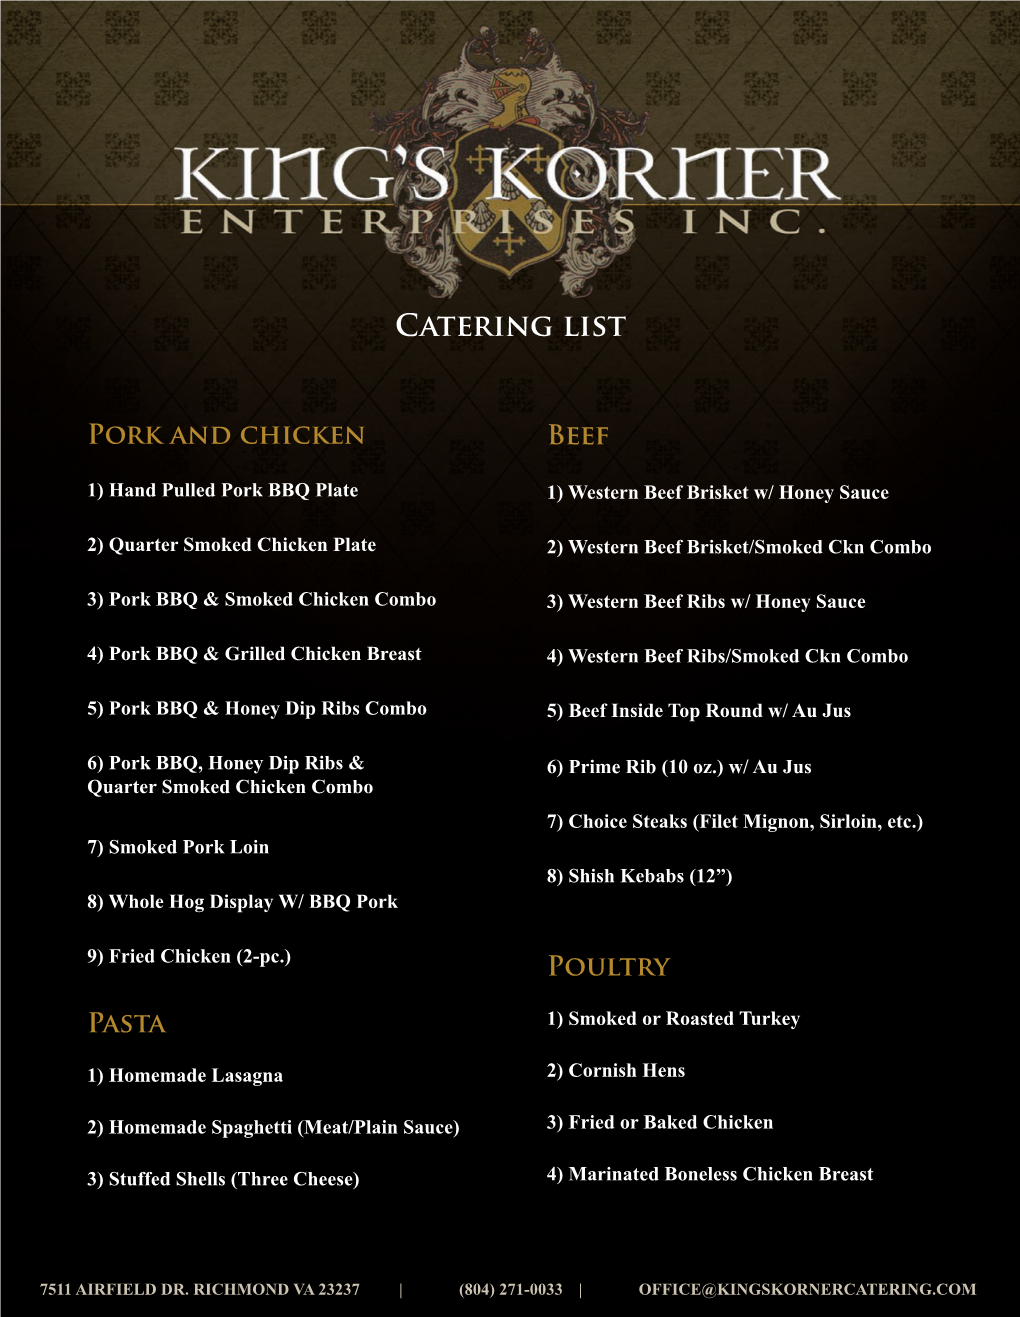 Catering Menu for More Information